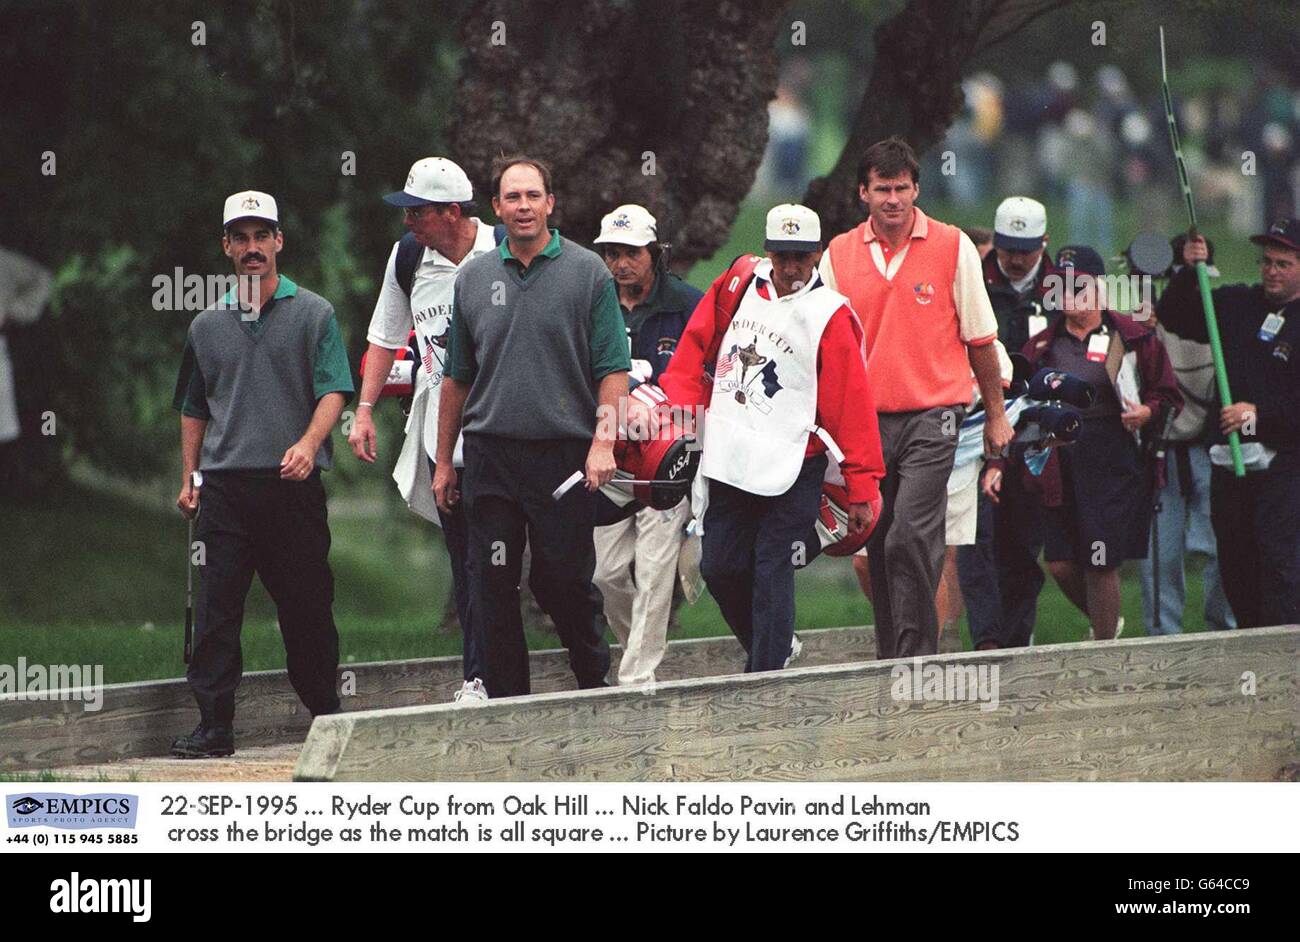 22-SEP-1995 ... Ryder Cup from Oak Hill ... Nick Faldo Pavin and Lehman cross the bridge as the match is all square ... Picture by Laurence Griffiths/EMPICS Stock Photo